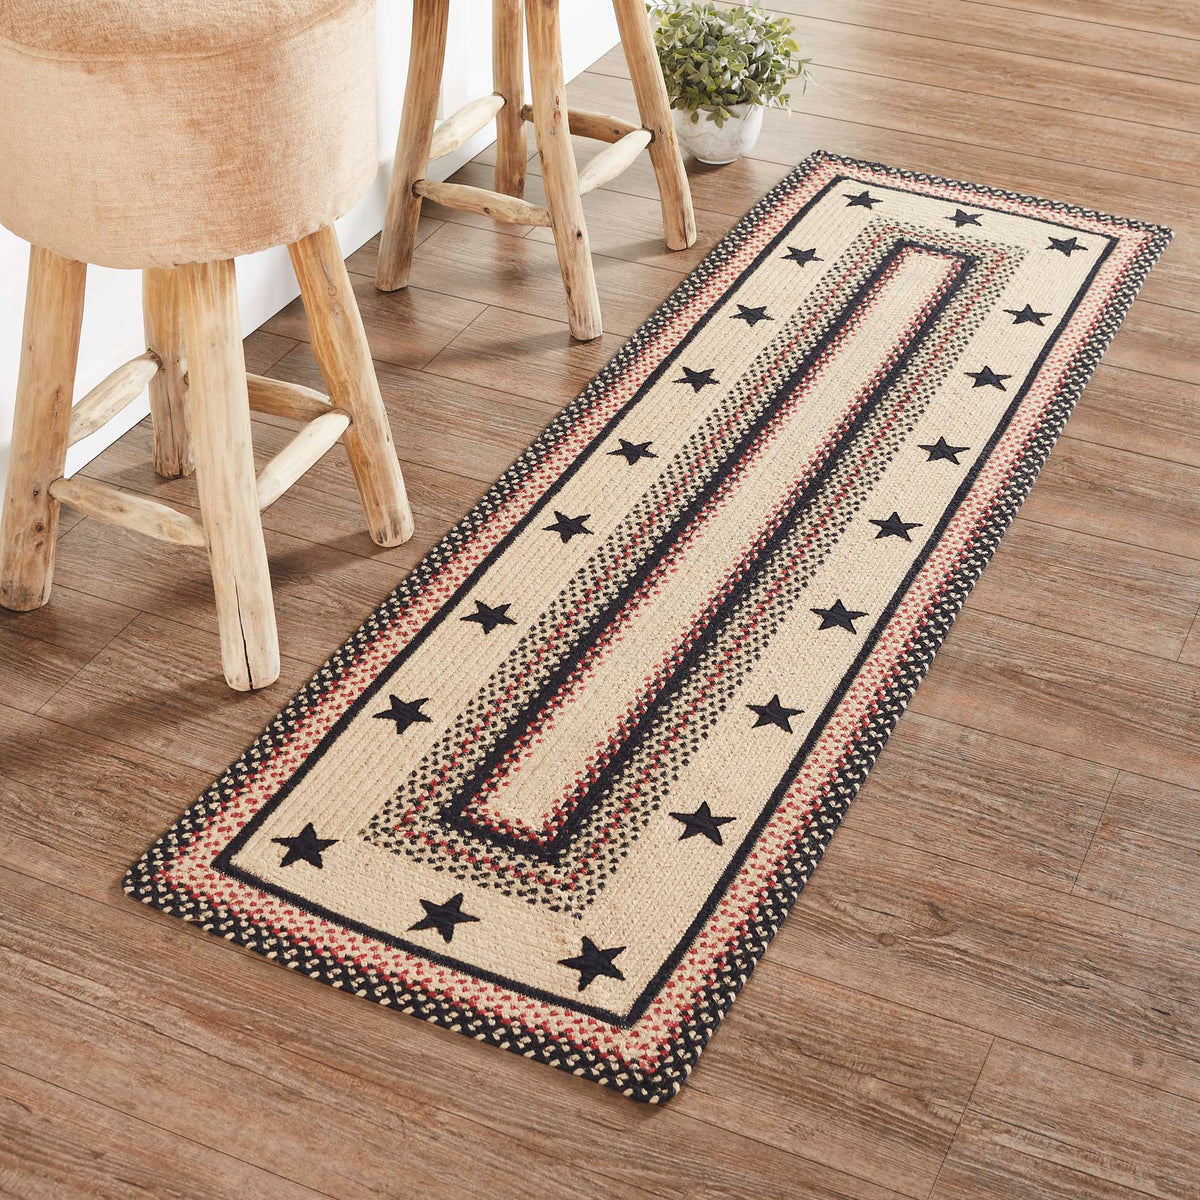 Ginger Spice Braided Oval Rug with Included Rug Pad